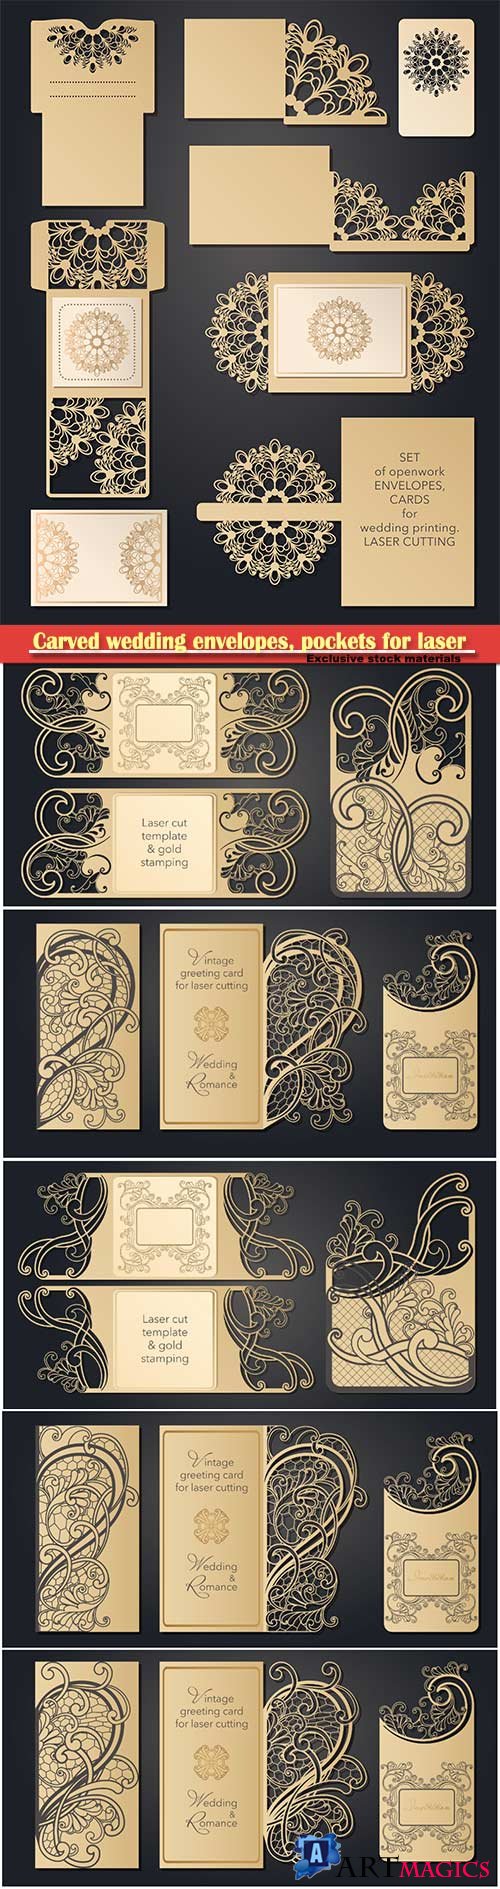 Carved wedding envelopes, pockets for laser cutting, invitations, wedding cards, party, romantic date